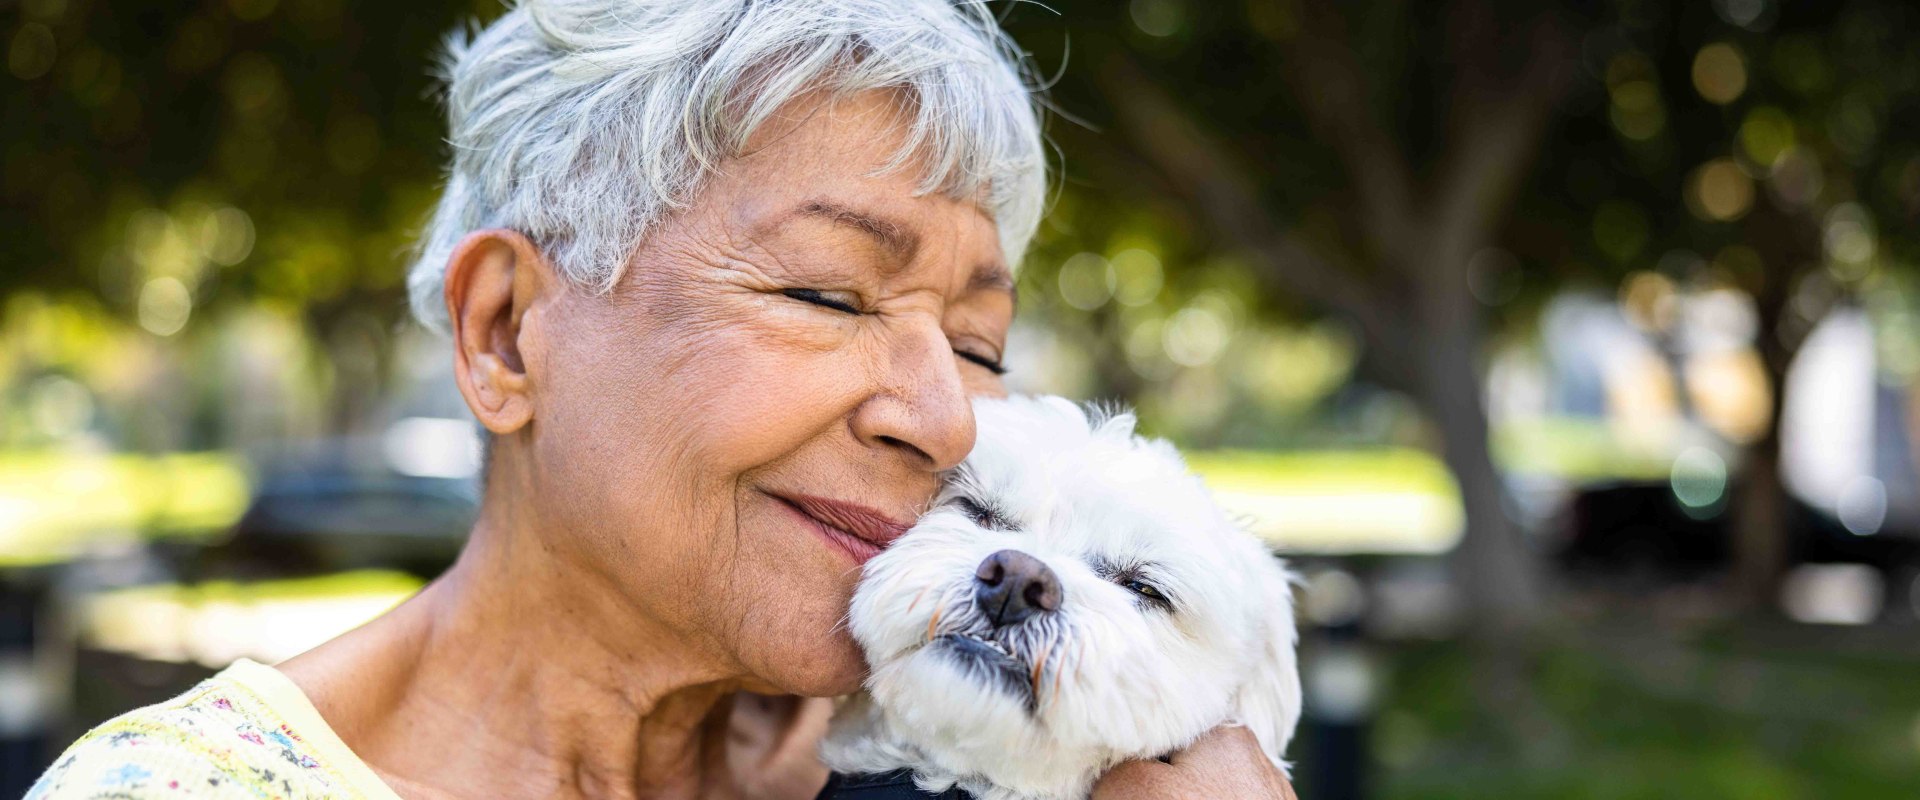 The Emotional Benefits of Pet Insurance for Aging Pets